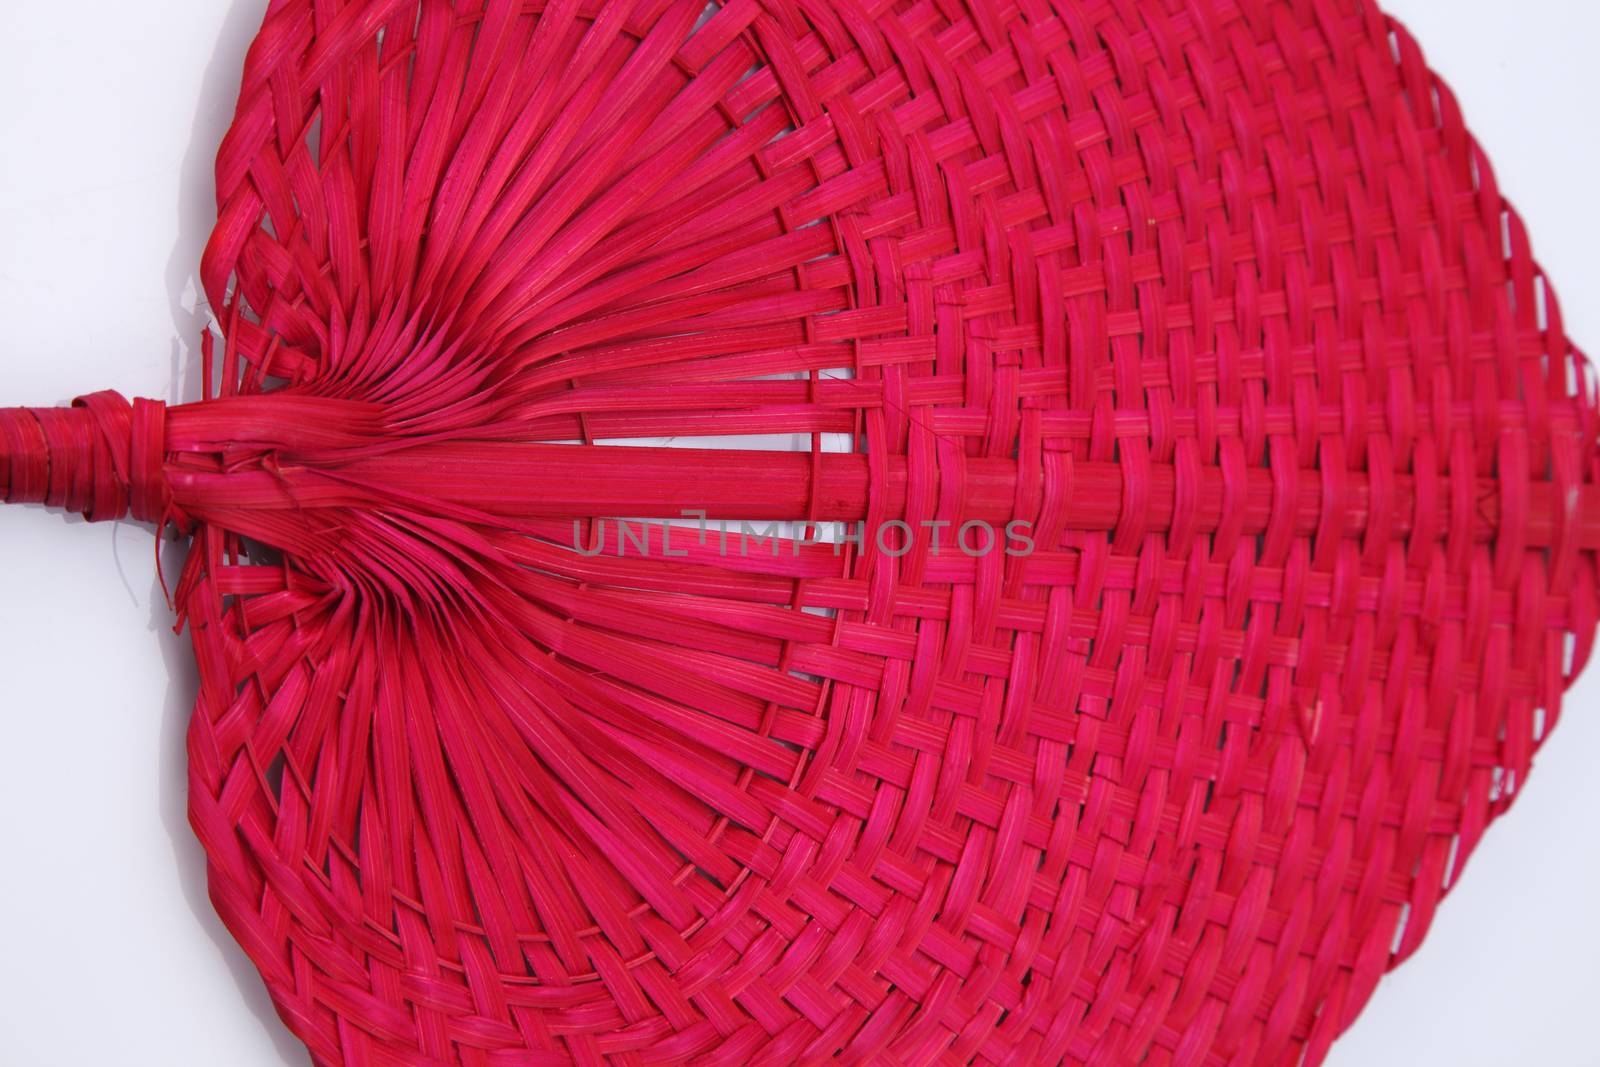 Red color native fan made from palm leaves on white background